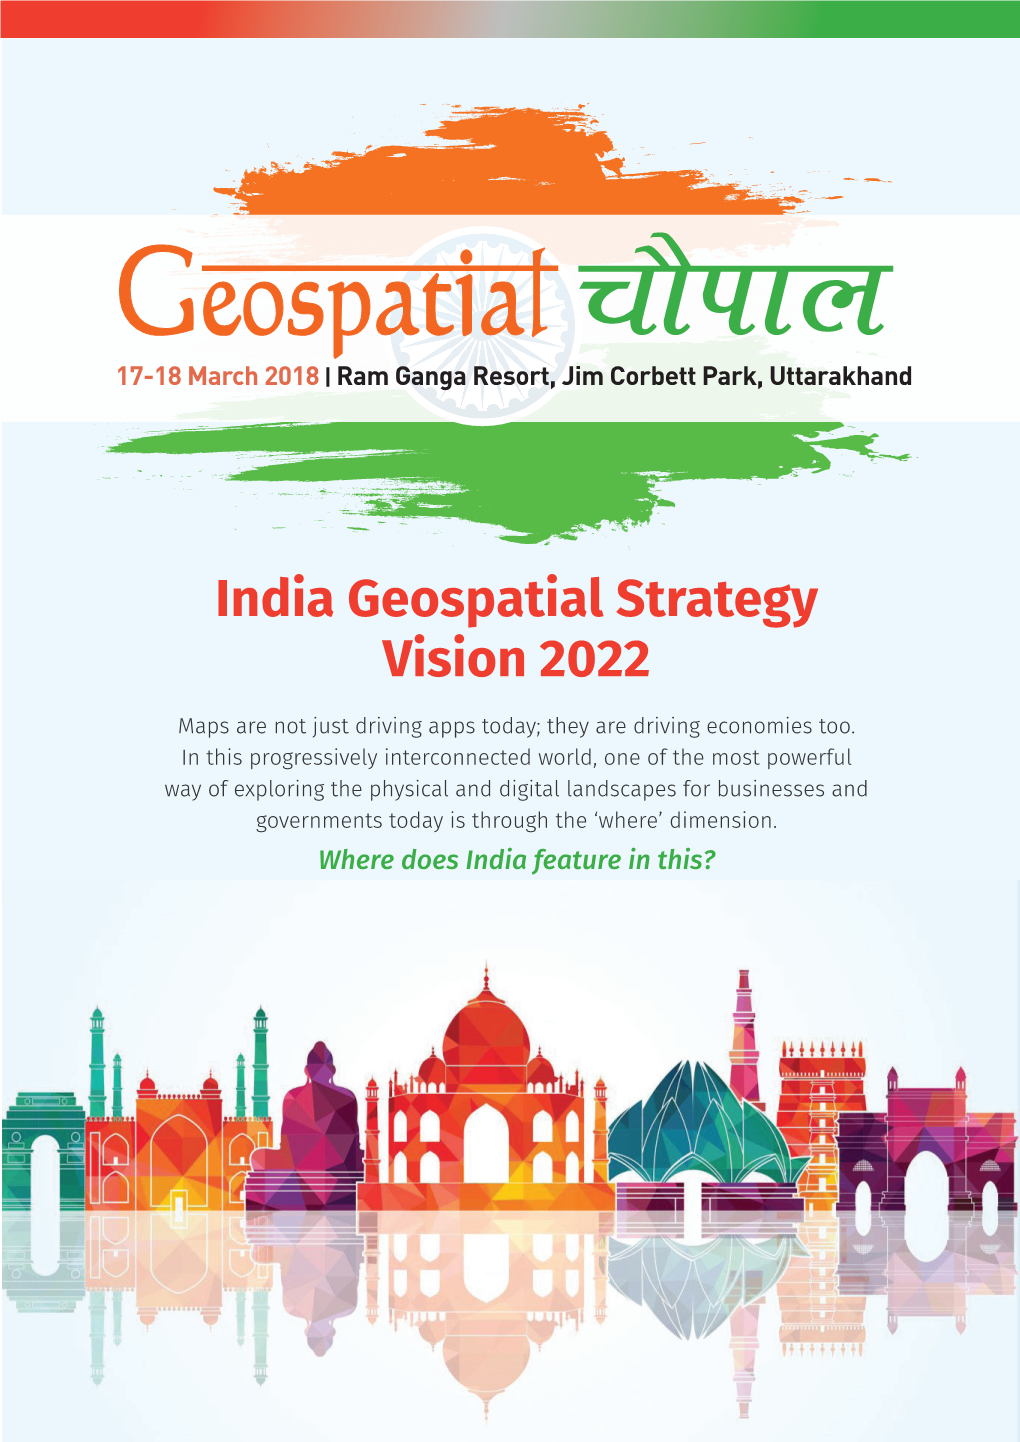 India Geospatial Strategy Vision 2022